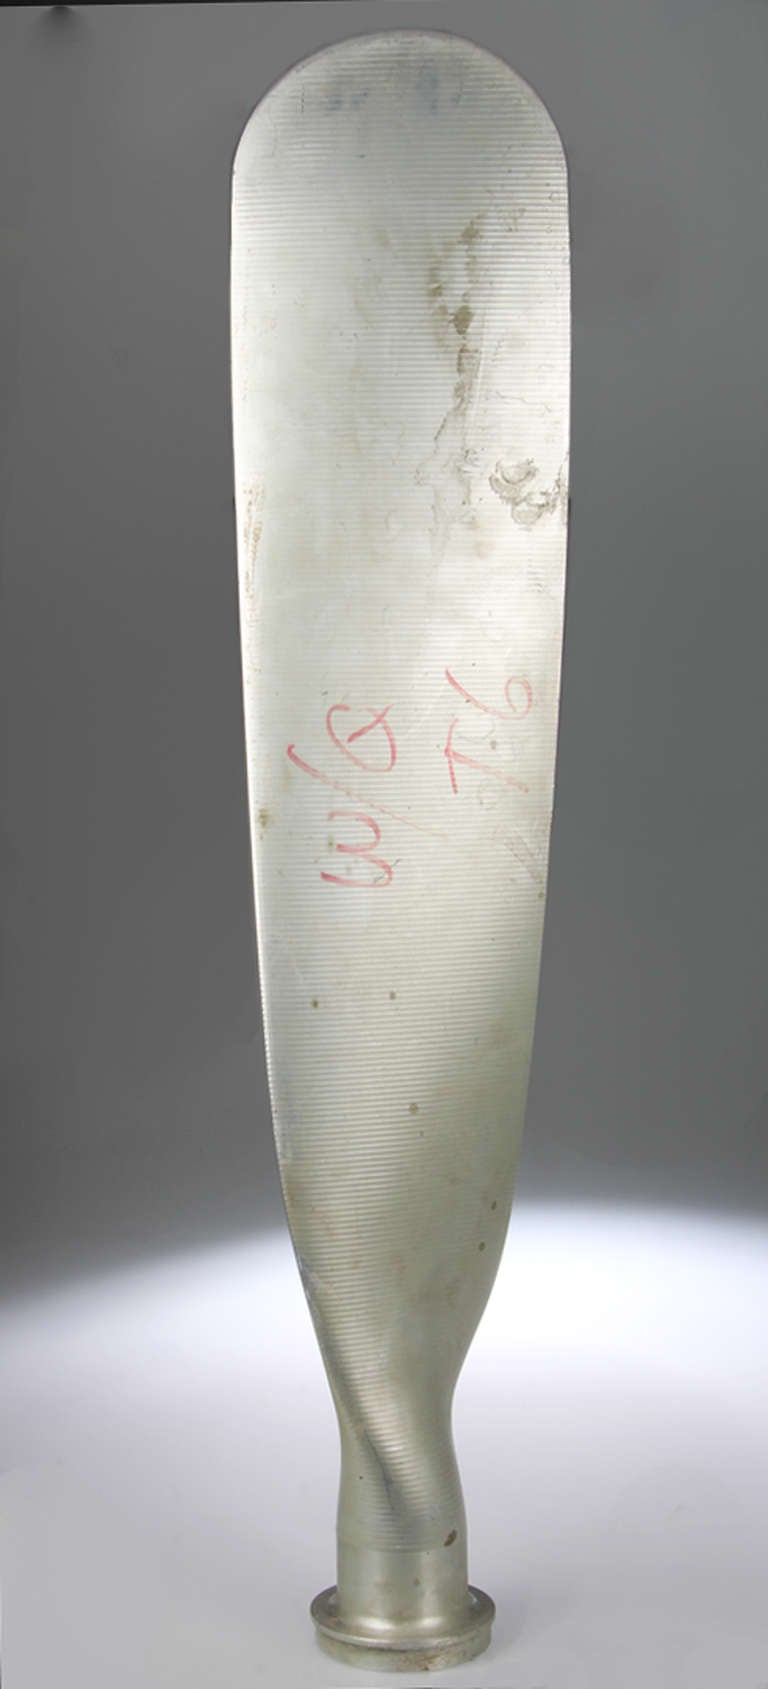 A large fluted aluminum airplane propeller with markings from a machinist or engineer.
T-6 is a specific type of aluminum.
Marked with a Test No.117078, M-1
and Serial Number J19037
the base below the flange measures 4.50 